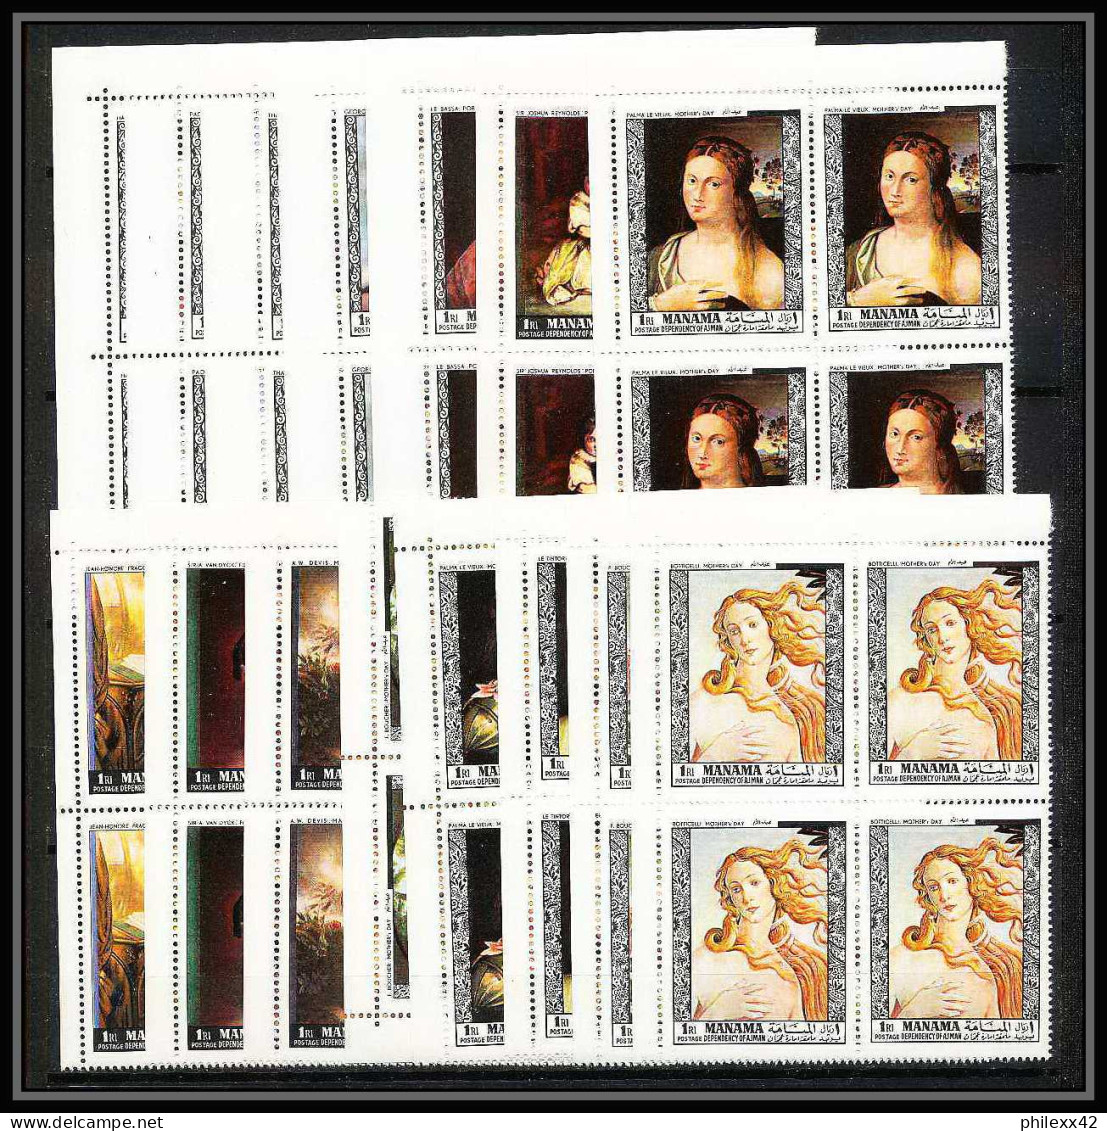 496c Manama MNH ** N° 432 / 446 A Tableau (tableaux Painting) Old Masters Botticelli Veronese Tintoretto Van Dyck Bloc 4 - Manama